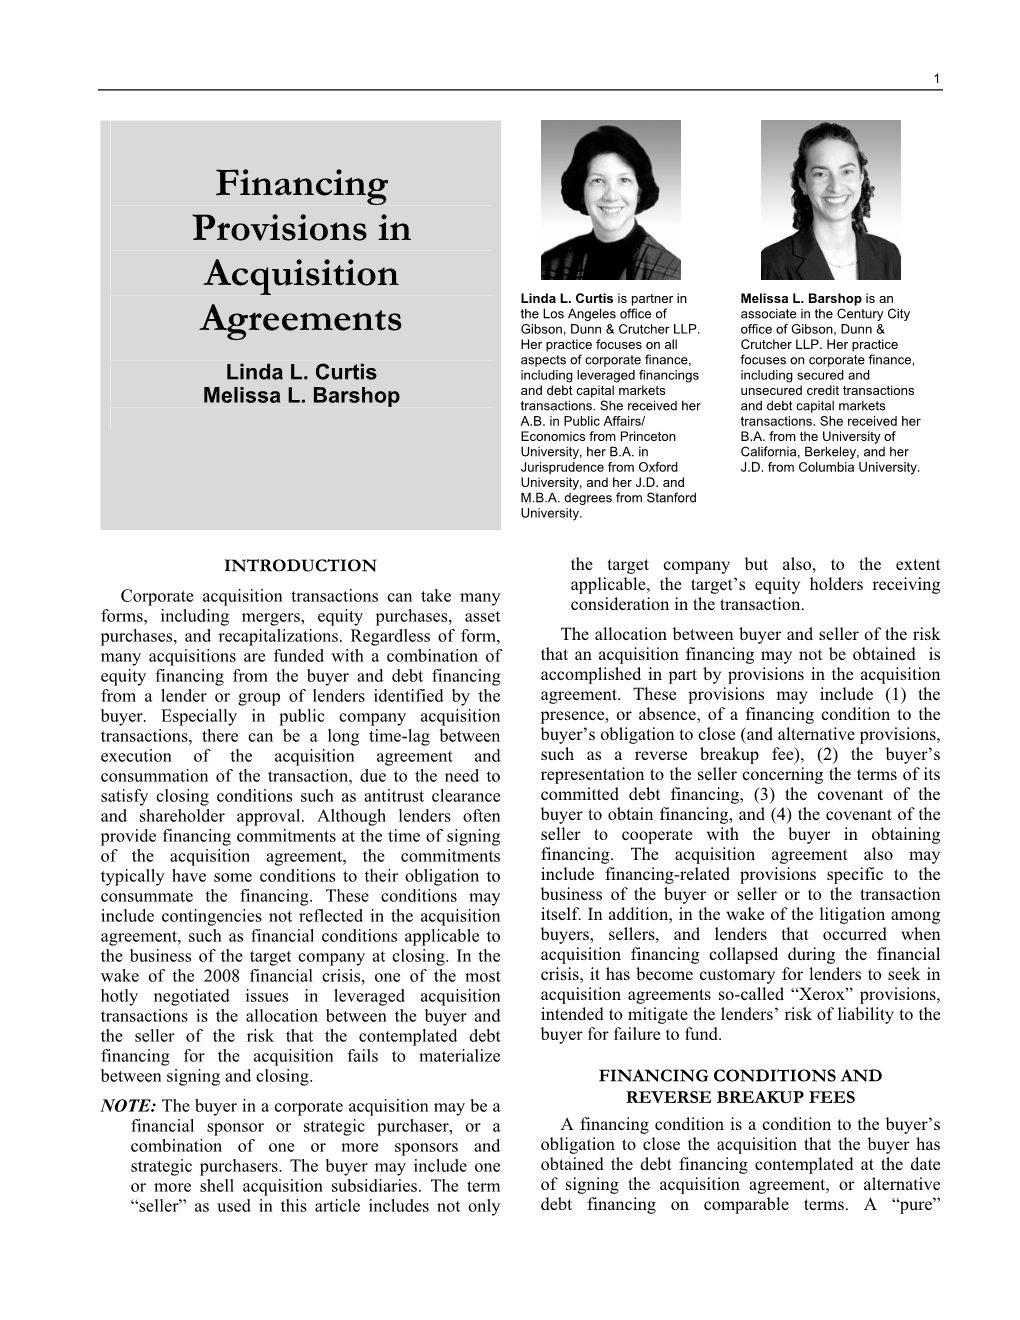 Financing Provisions in Acquisition Agreements 2 Financing Condition Squarely Allocates the Risk of a RAM Holdings, Inc